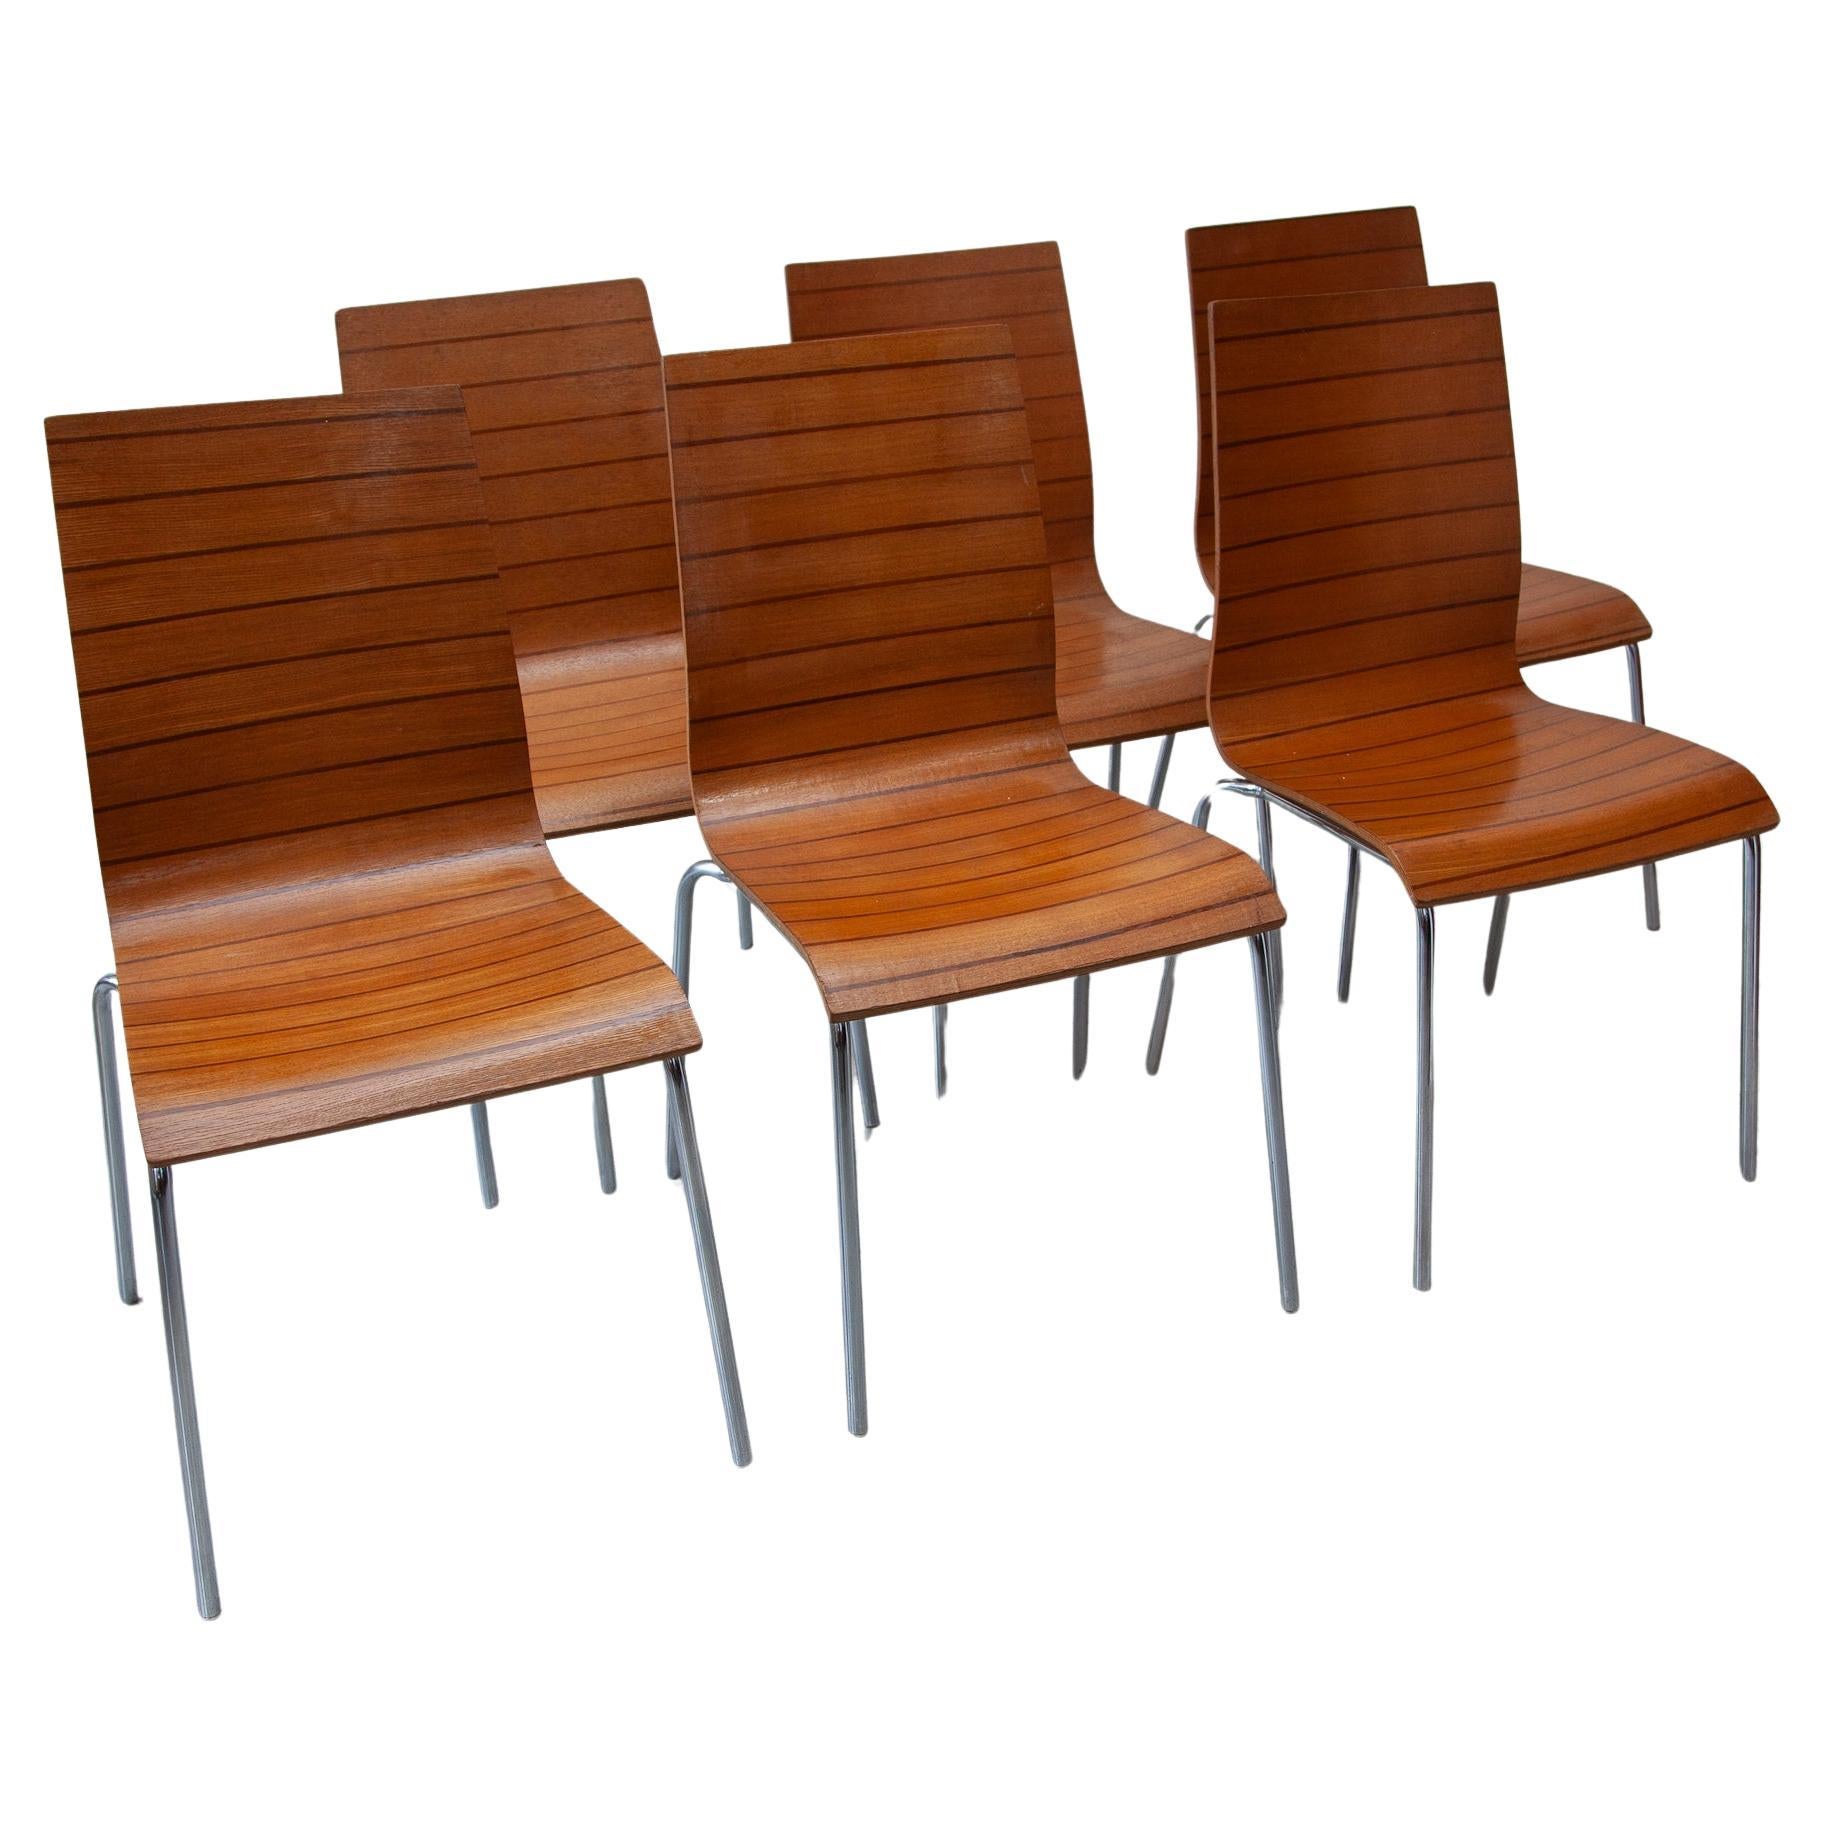 Set of Six High Back Stacking Plywood Chairs, 1980s